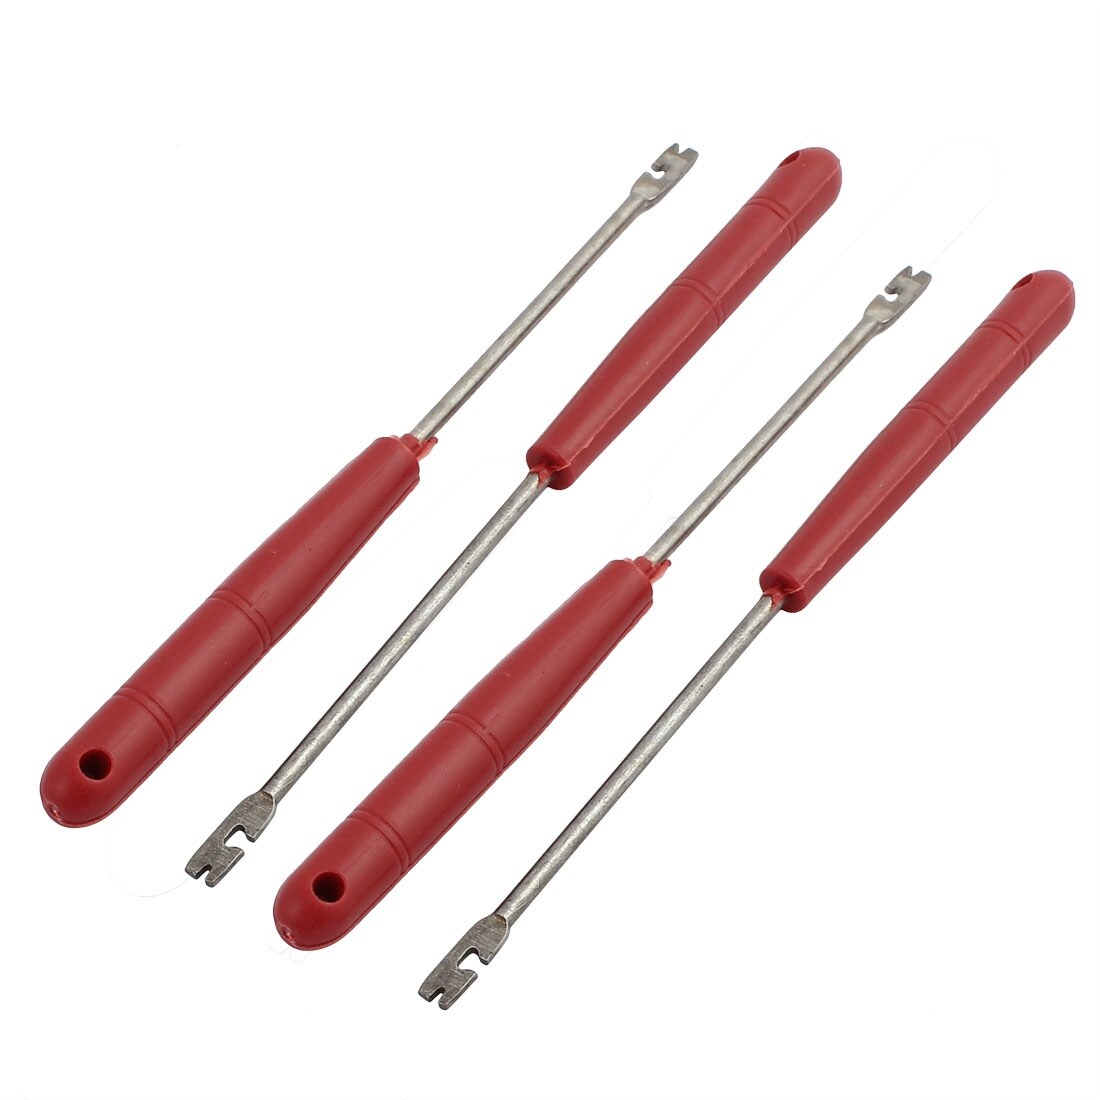 Red Fishing Tackle Fish Hook Detacher Removal Tool Unhook Extractor 4 PCS -  Bed Bath & Beyond - 17577062